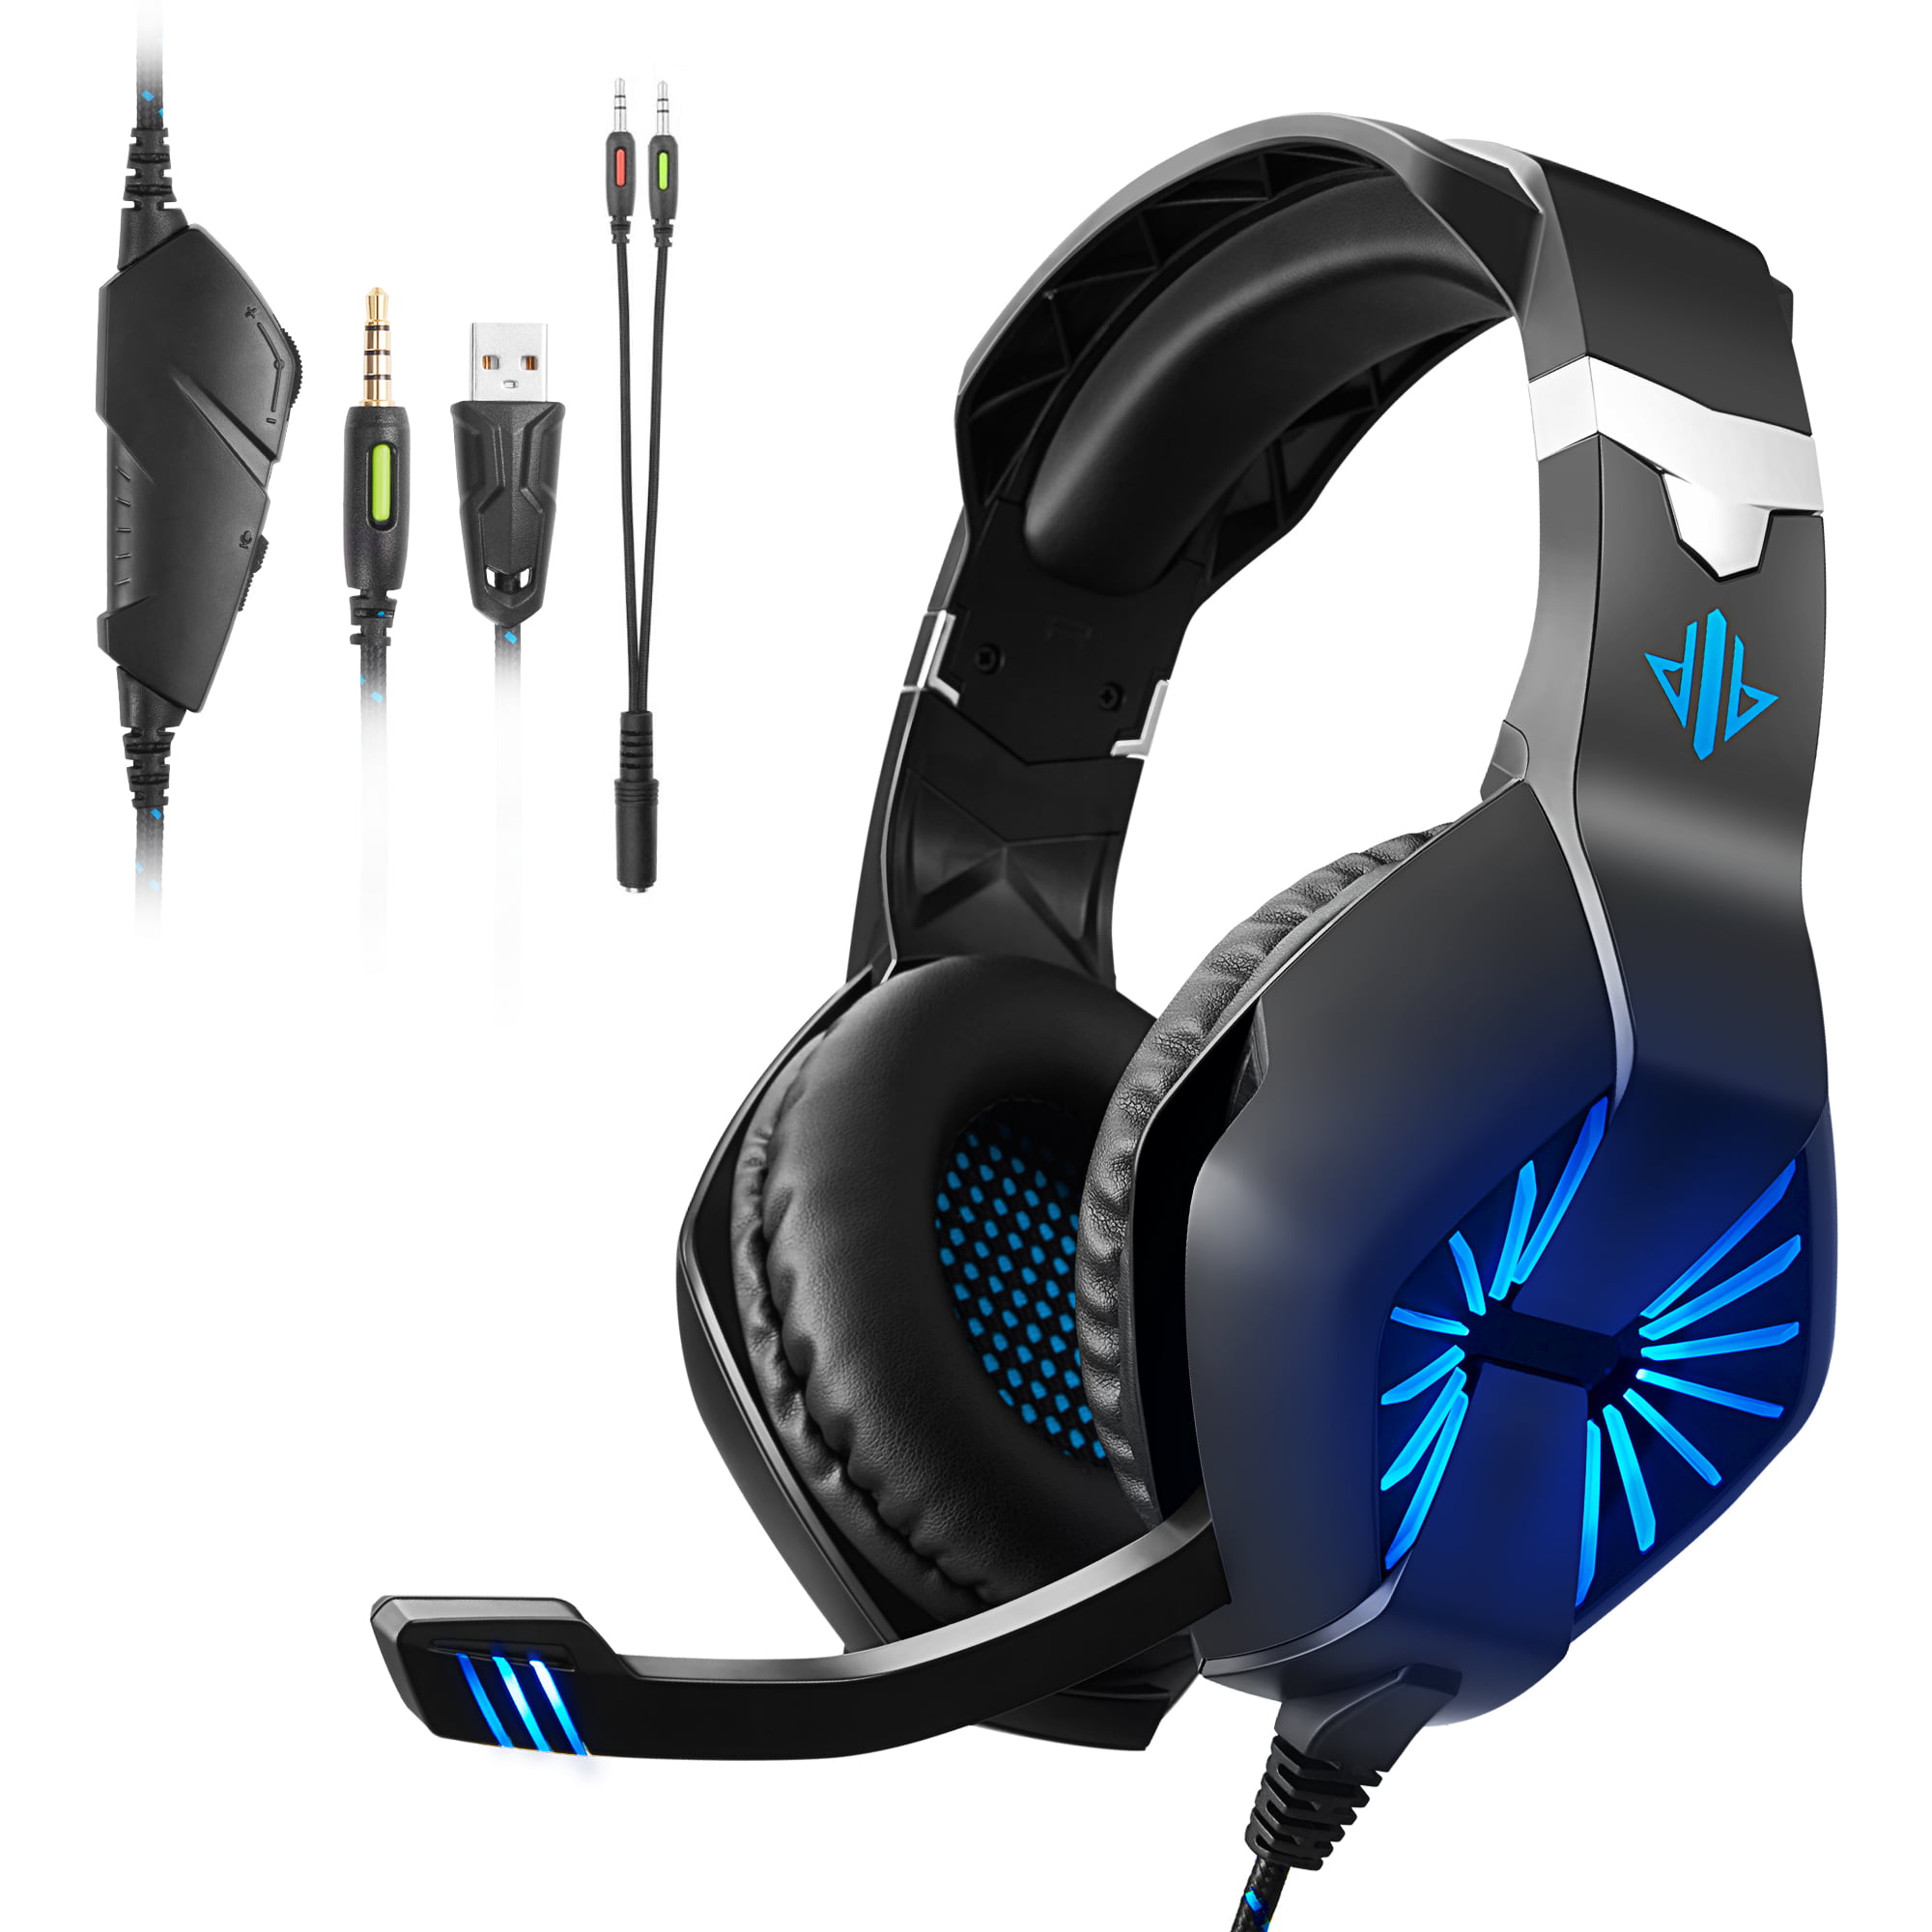 Gaming Headset With Mic For Xbox One Ps4 Nintendo Switch And Pc Surround Sound Over Ear Gaming Headphones With Noise Cancelling Mic Led Lights - roblox game headphone earphone